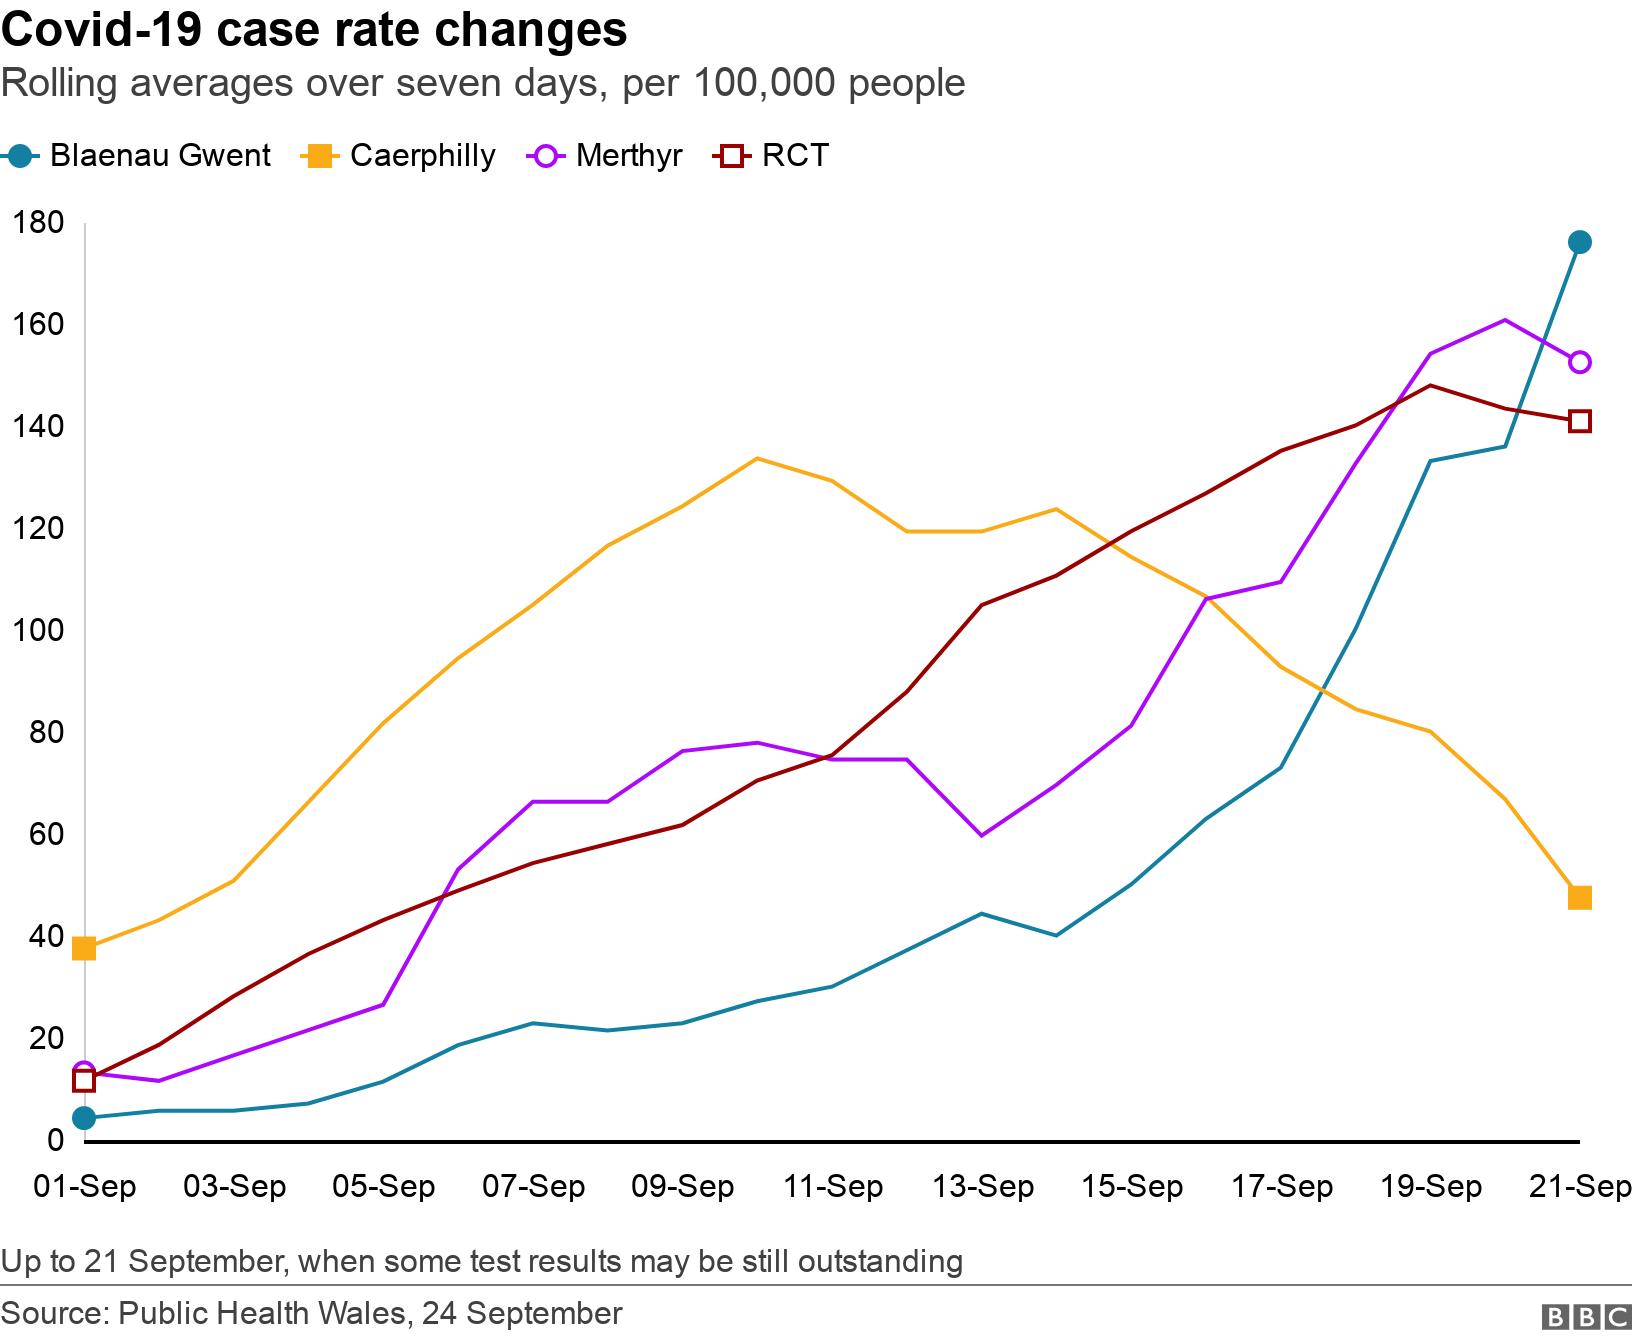 Covid-19 case rate changes. Rolling averages over seven days, per 100,000 people.  Up to 21 September, when some test results may be still outstanding.